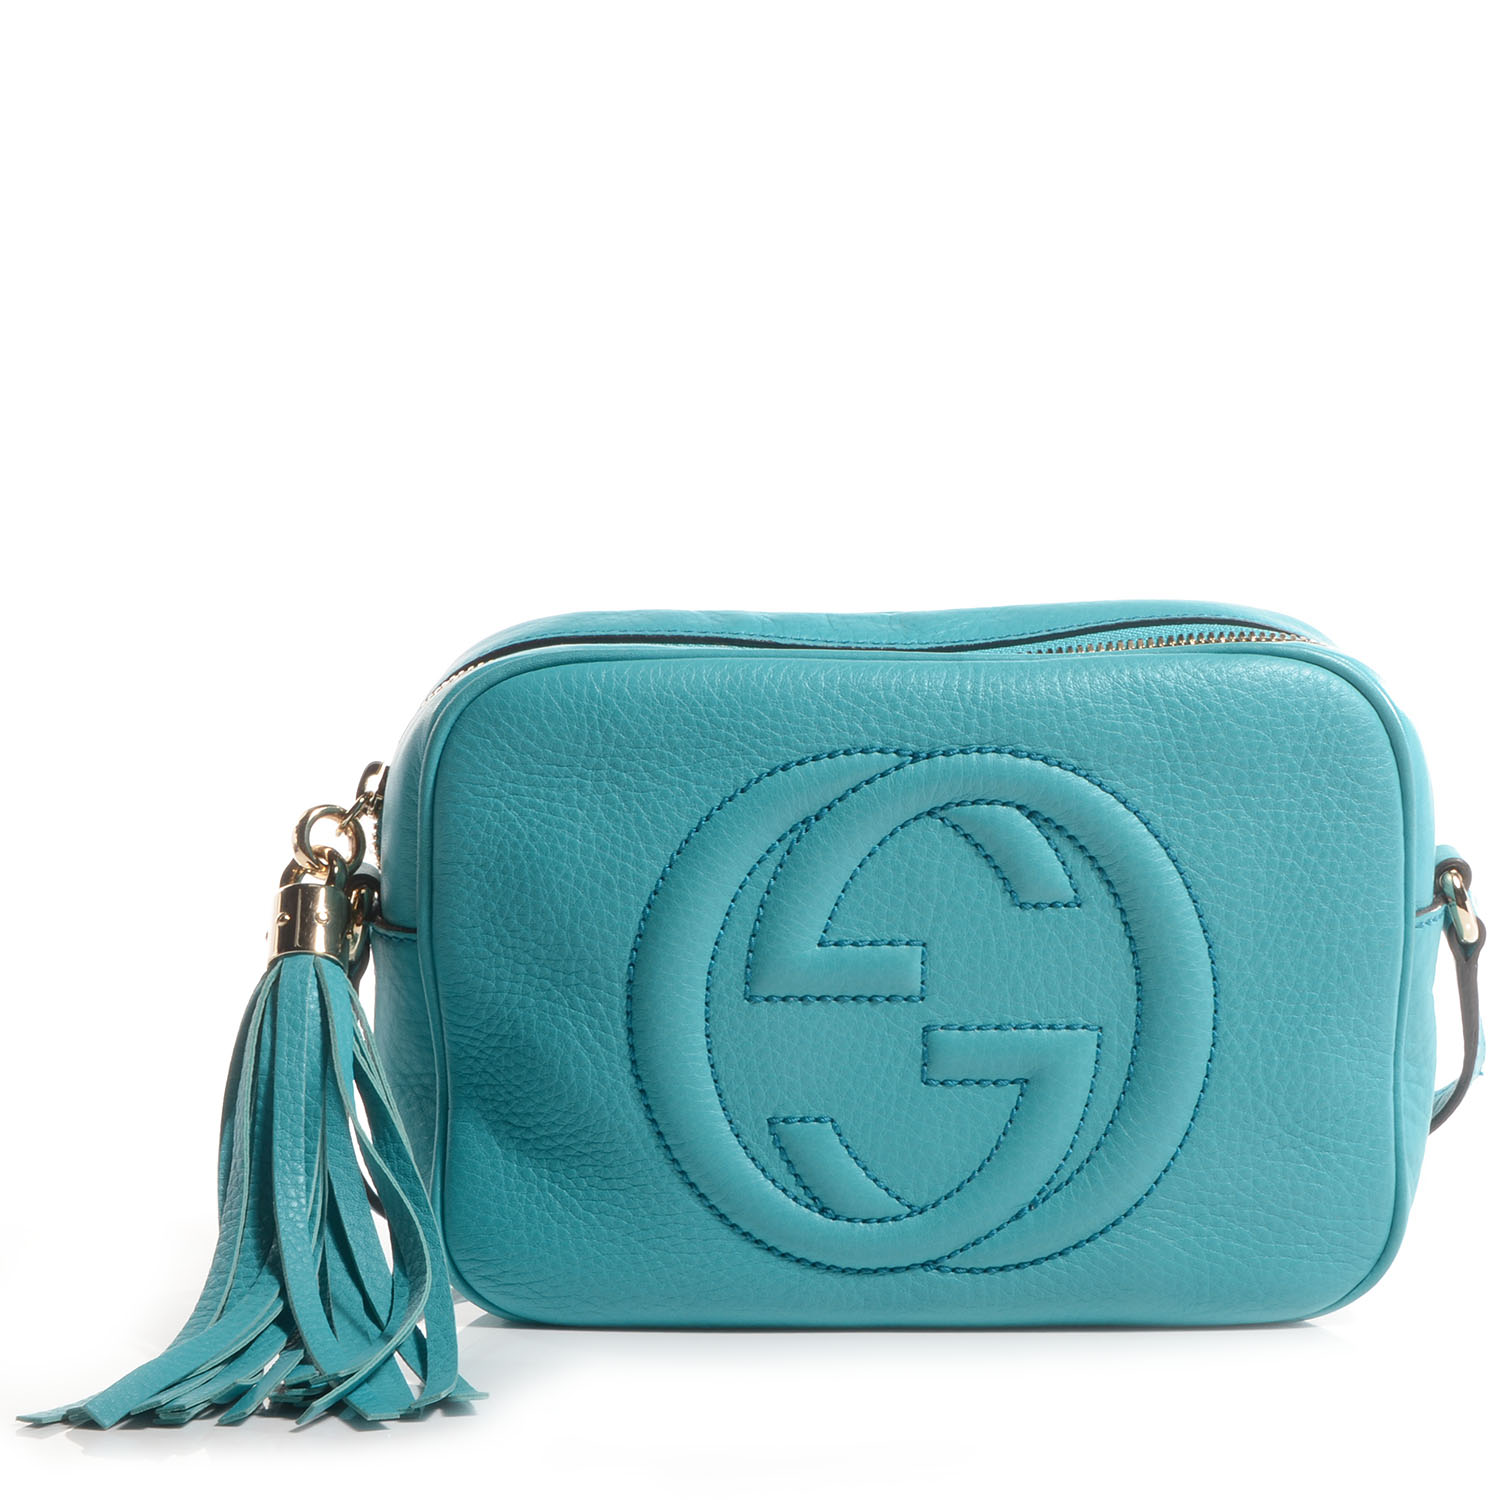 turquoise gucci bag, OFF 72%,Cheap price!